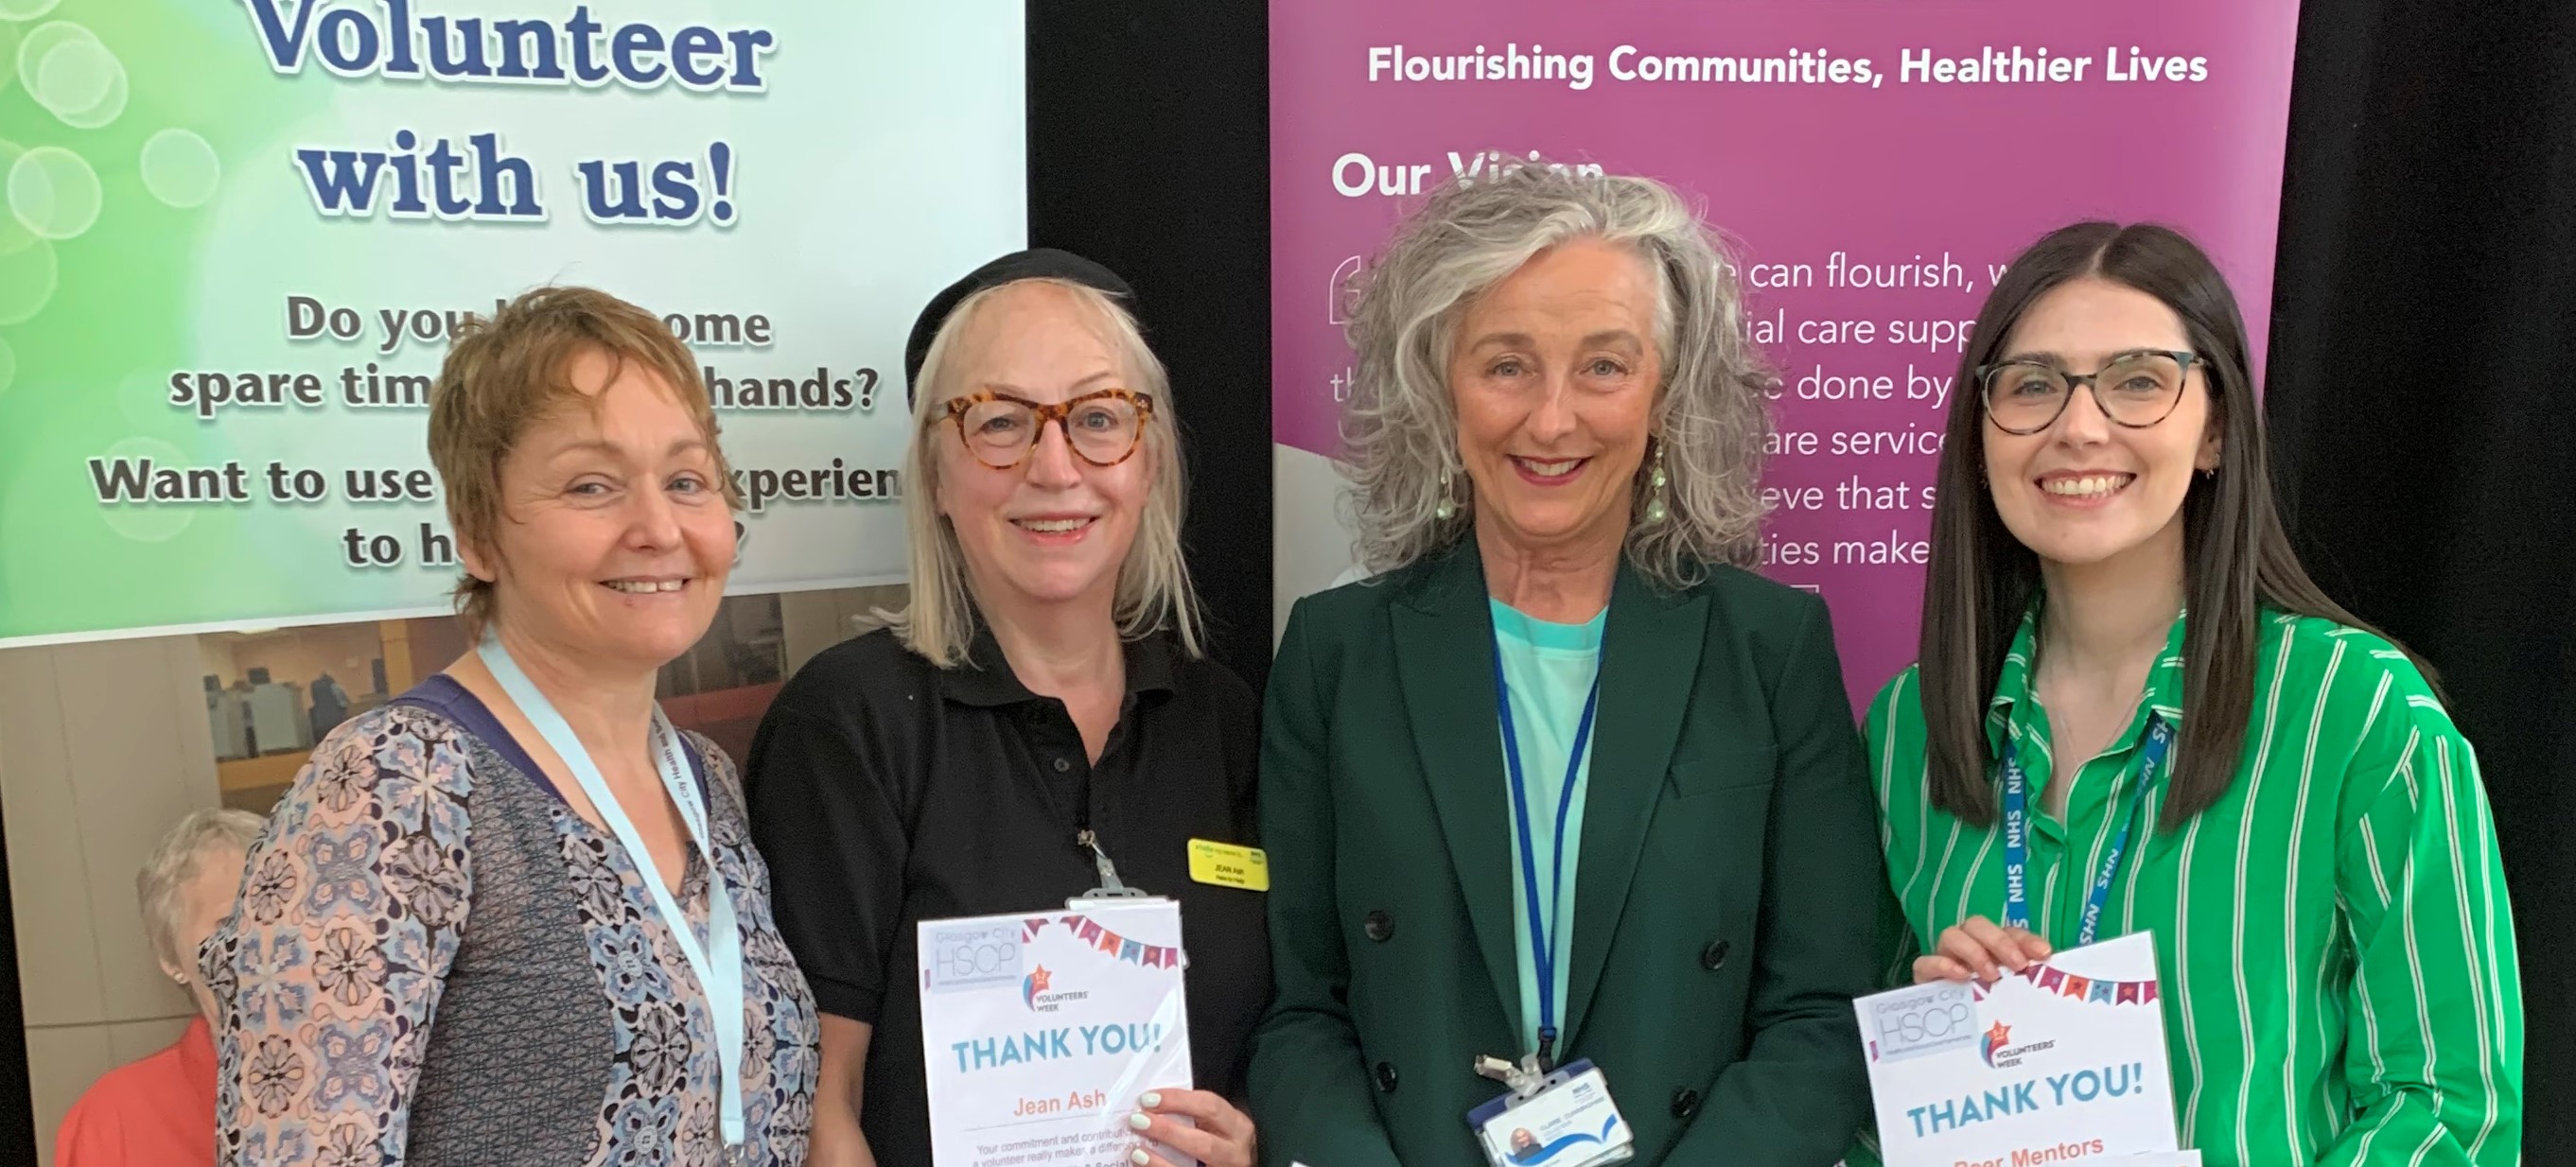 Caption - Volunteers in picture – Claire Cunningham, Arts volunteer, Jean Ash Hub Café Assistant volunteer and Katie Yuile (collecting the award on behalf of the Prison Peer Mentors volunteers) with Fiona Moss.